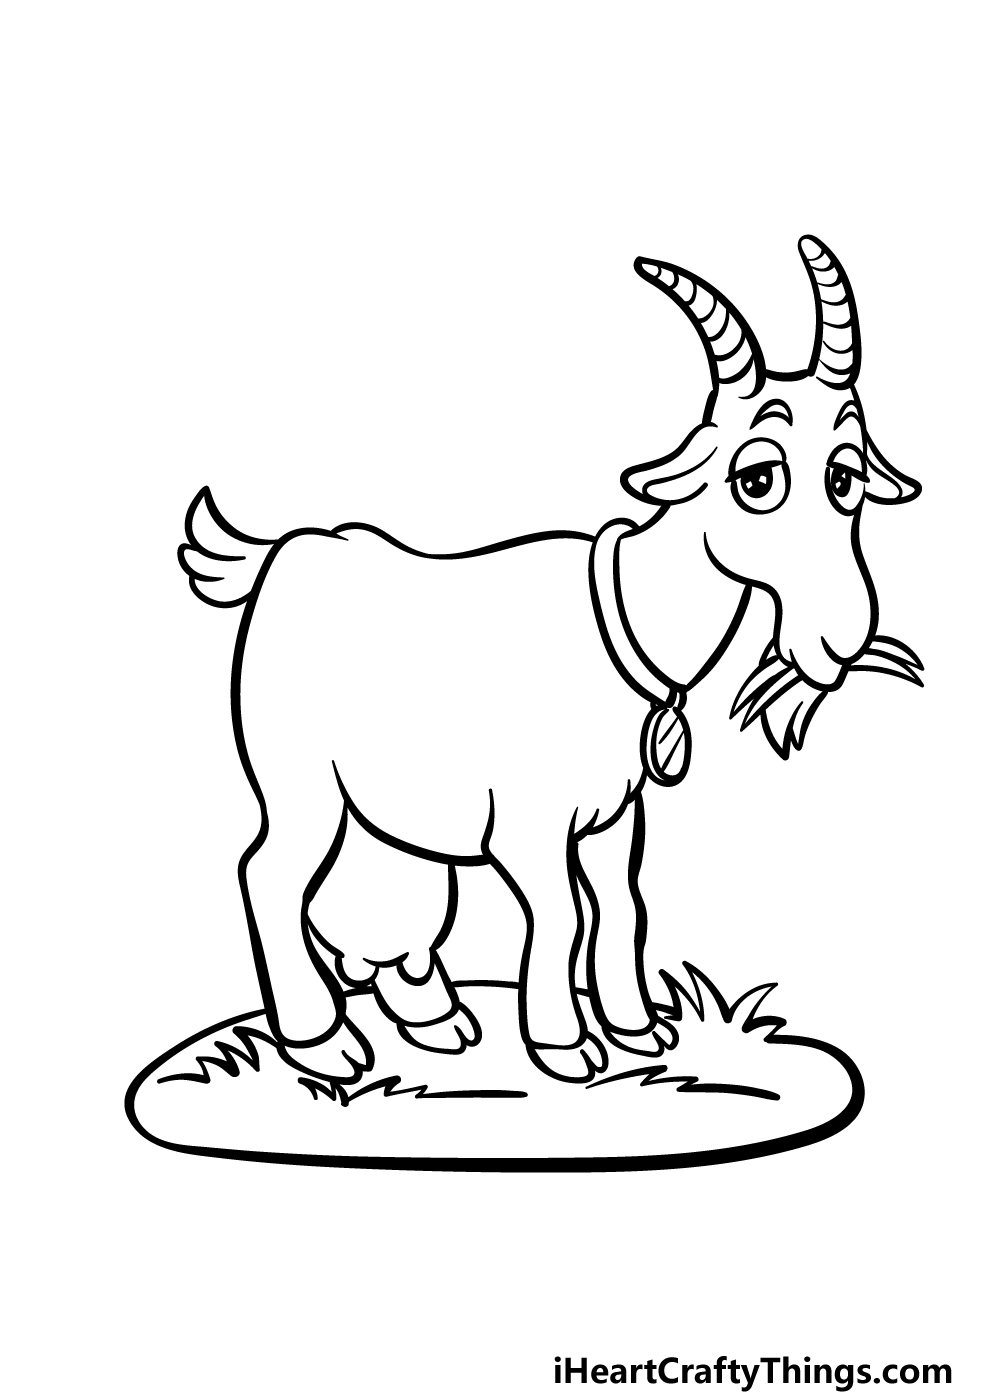 Cartoon Goat Drawing - How To Draw A Cartoon Goat Step By Step